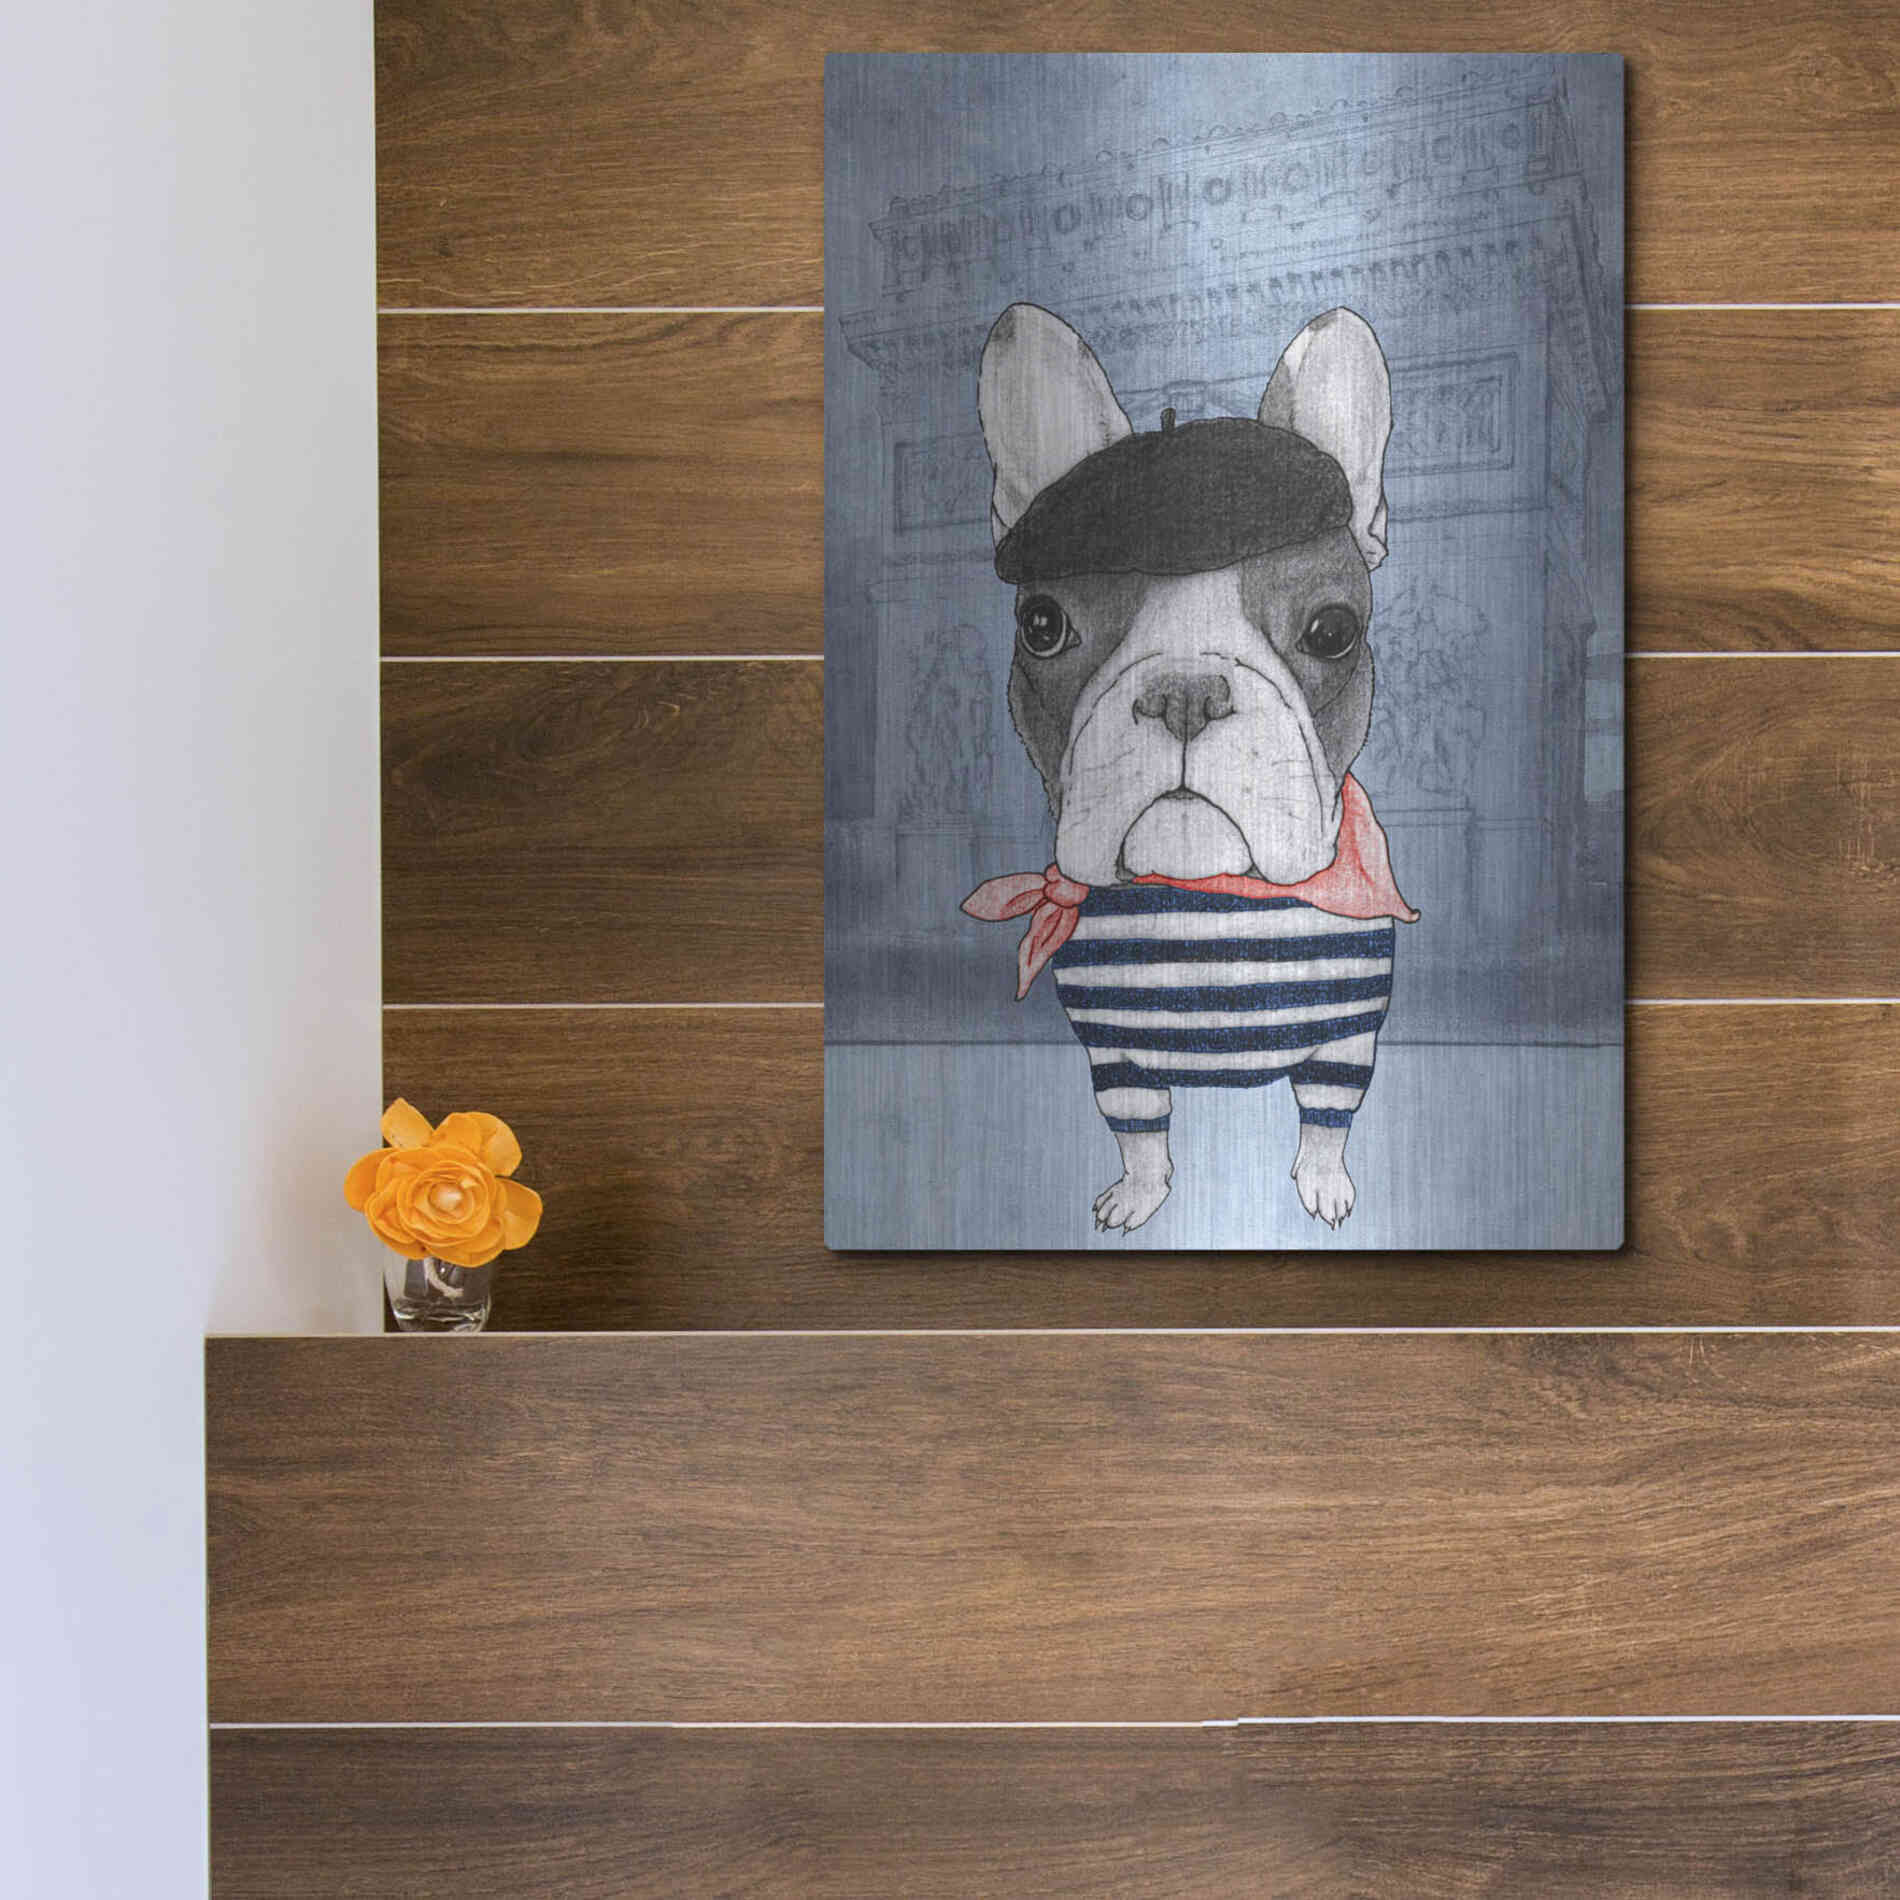 Luxe Metal Art 'French Bulldog with Arc de Triomphe' by Barruf Metal Wall Art,12x16